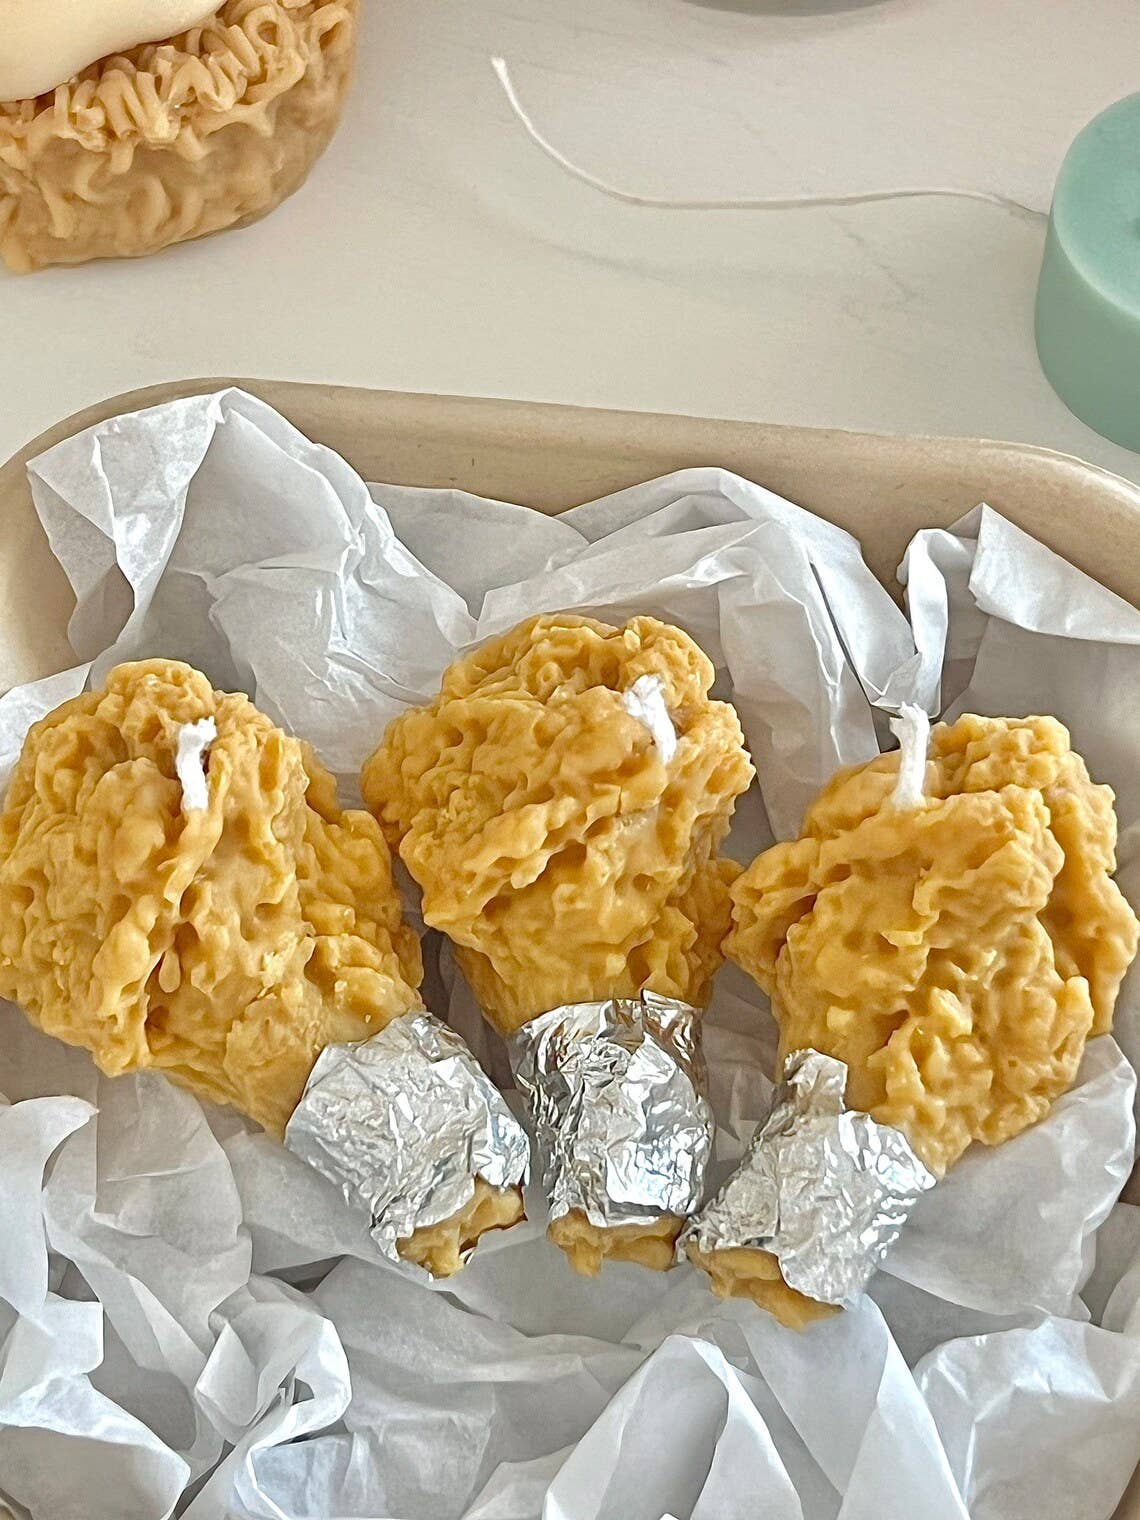 Set of three decorative candles that look like crispy fried chicken.